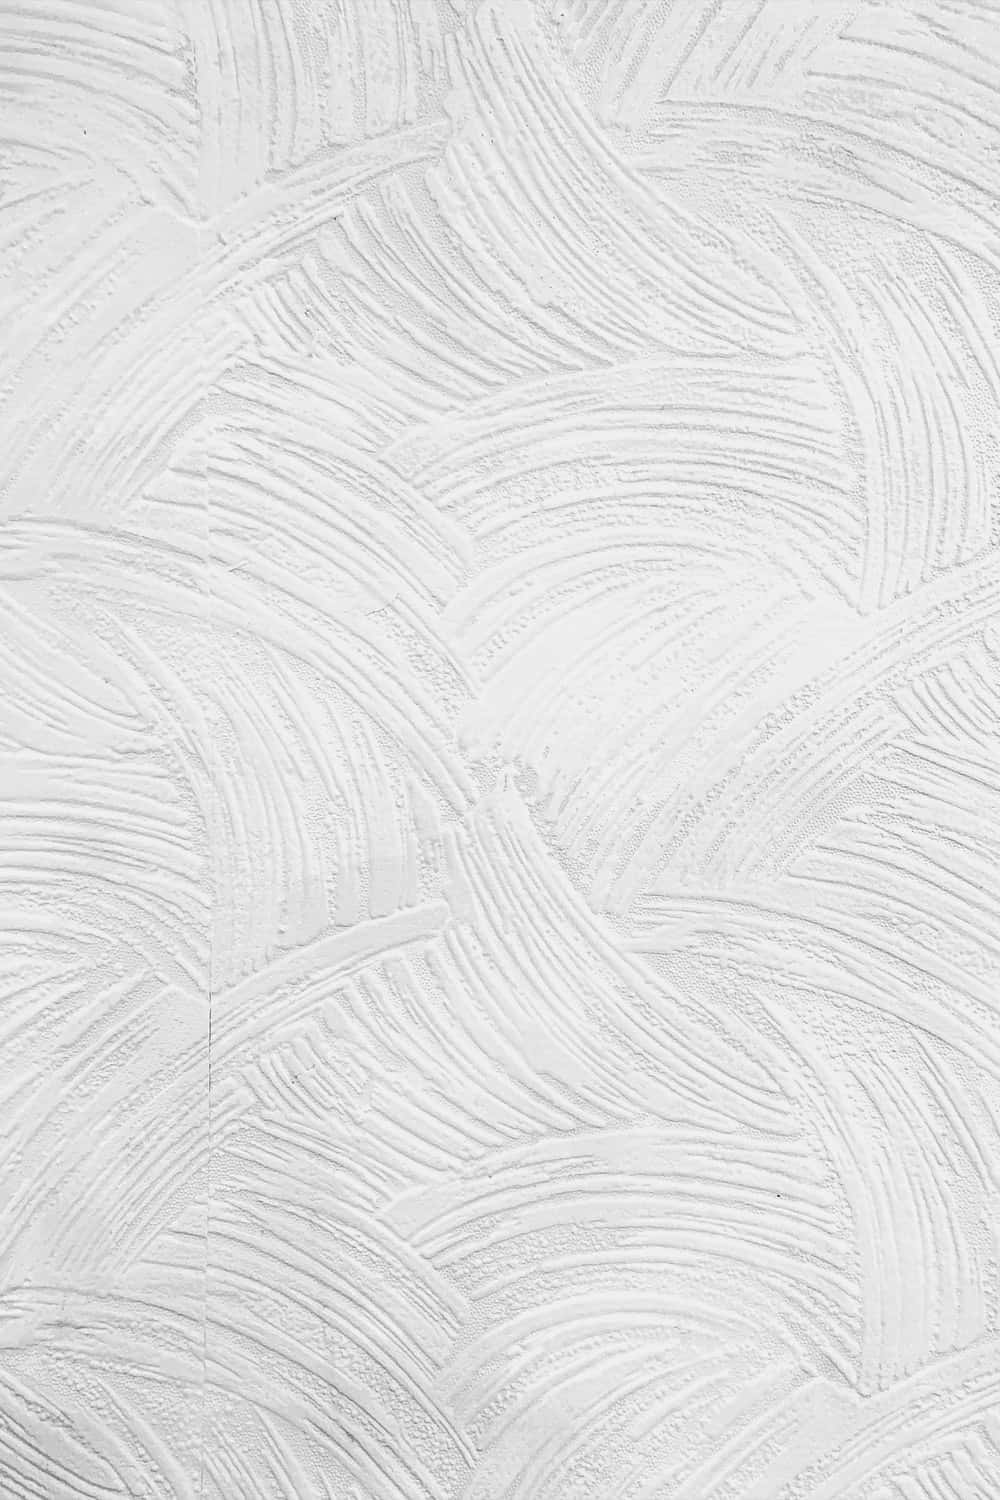 White Textured Paint Wall Wallpaper